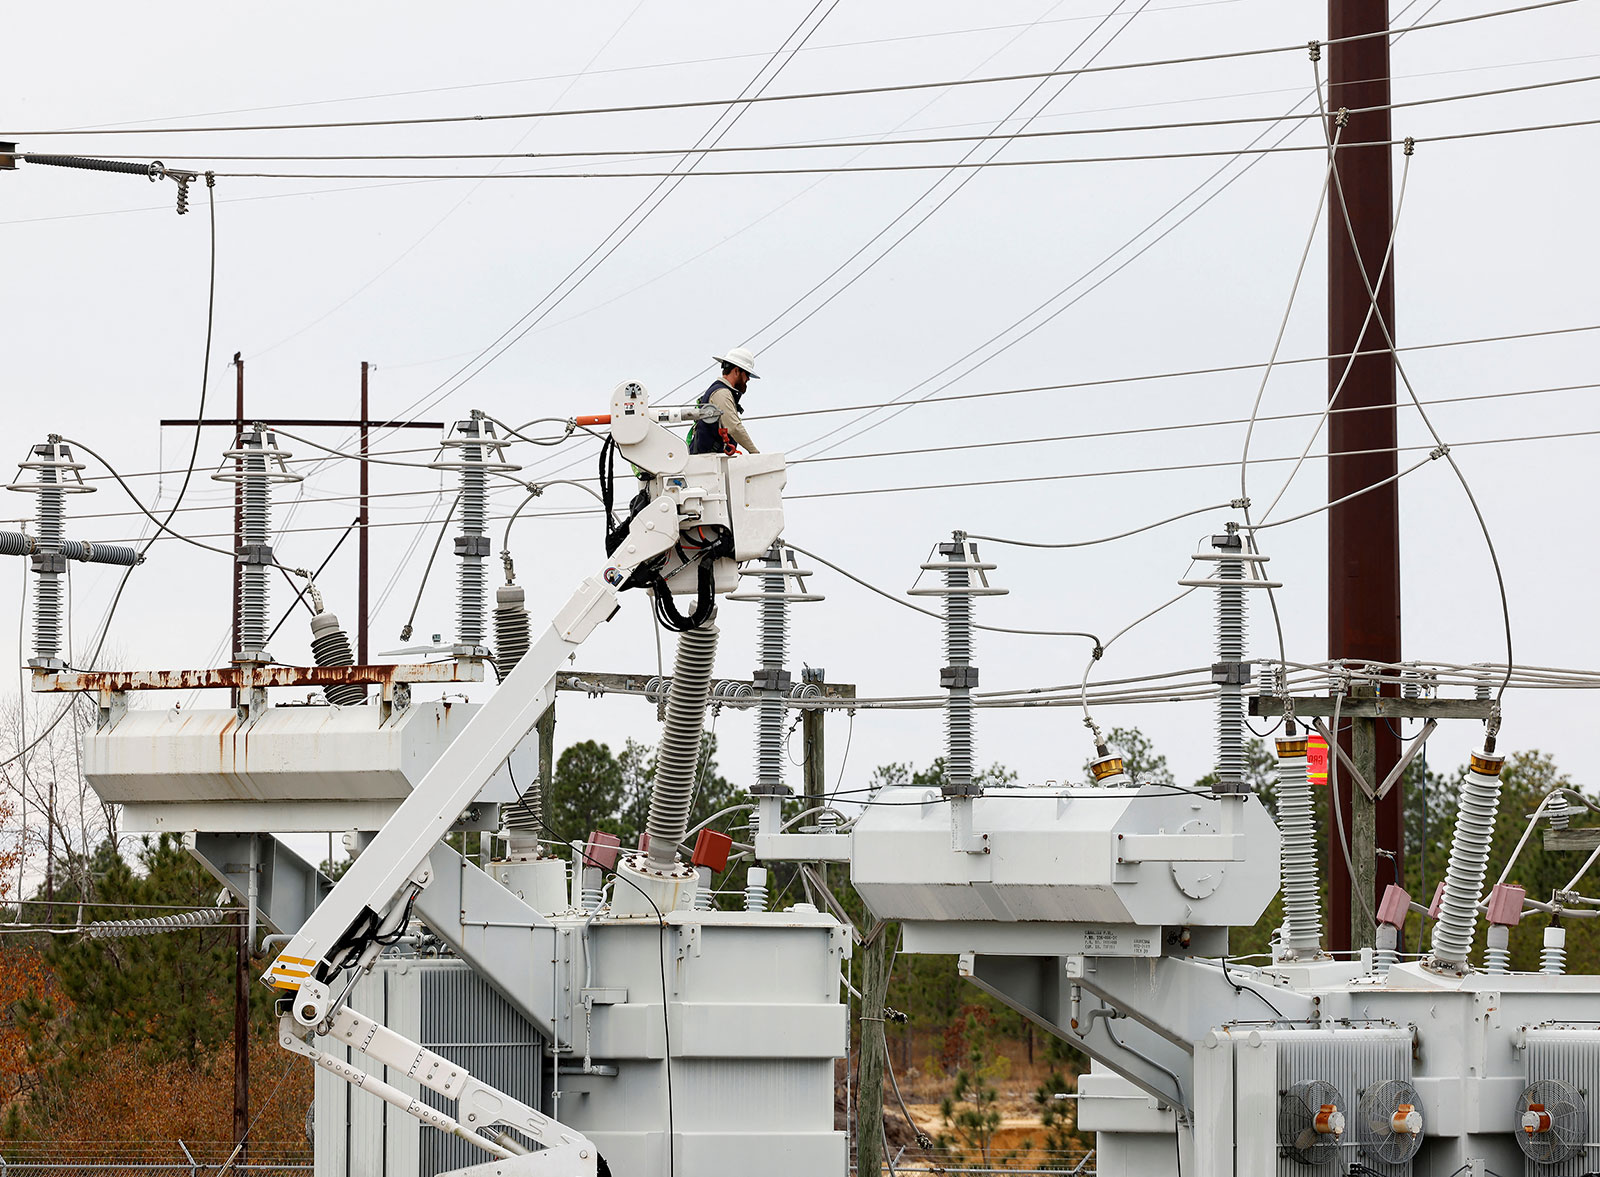 Duke Energy personnel work to restore power at an electrical substation in Carthage, North Carolina, on December 4.